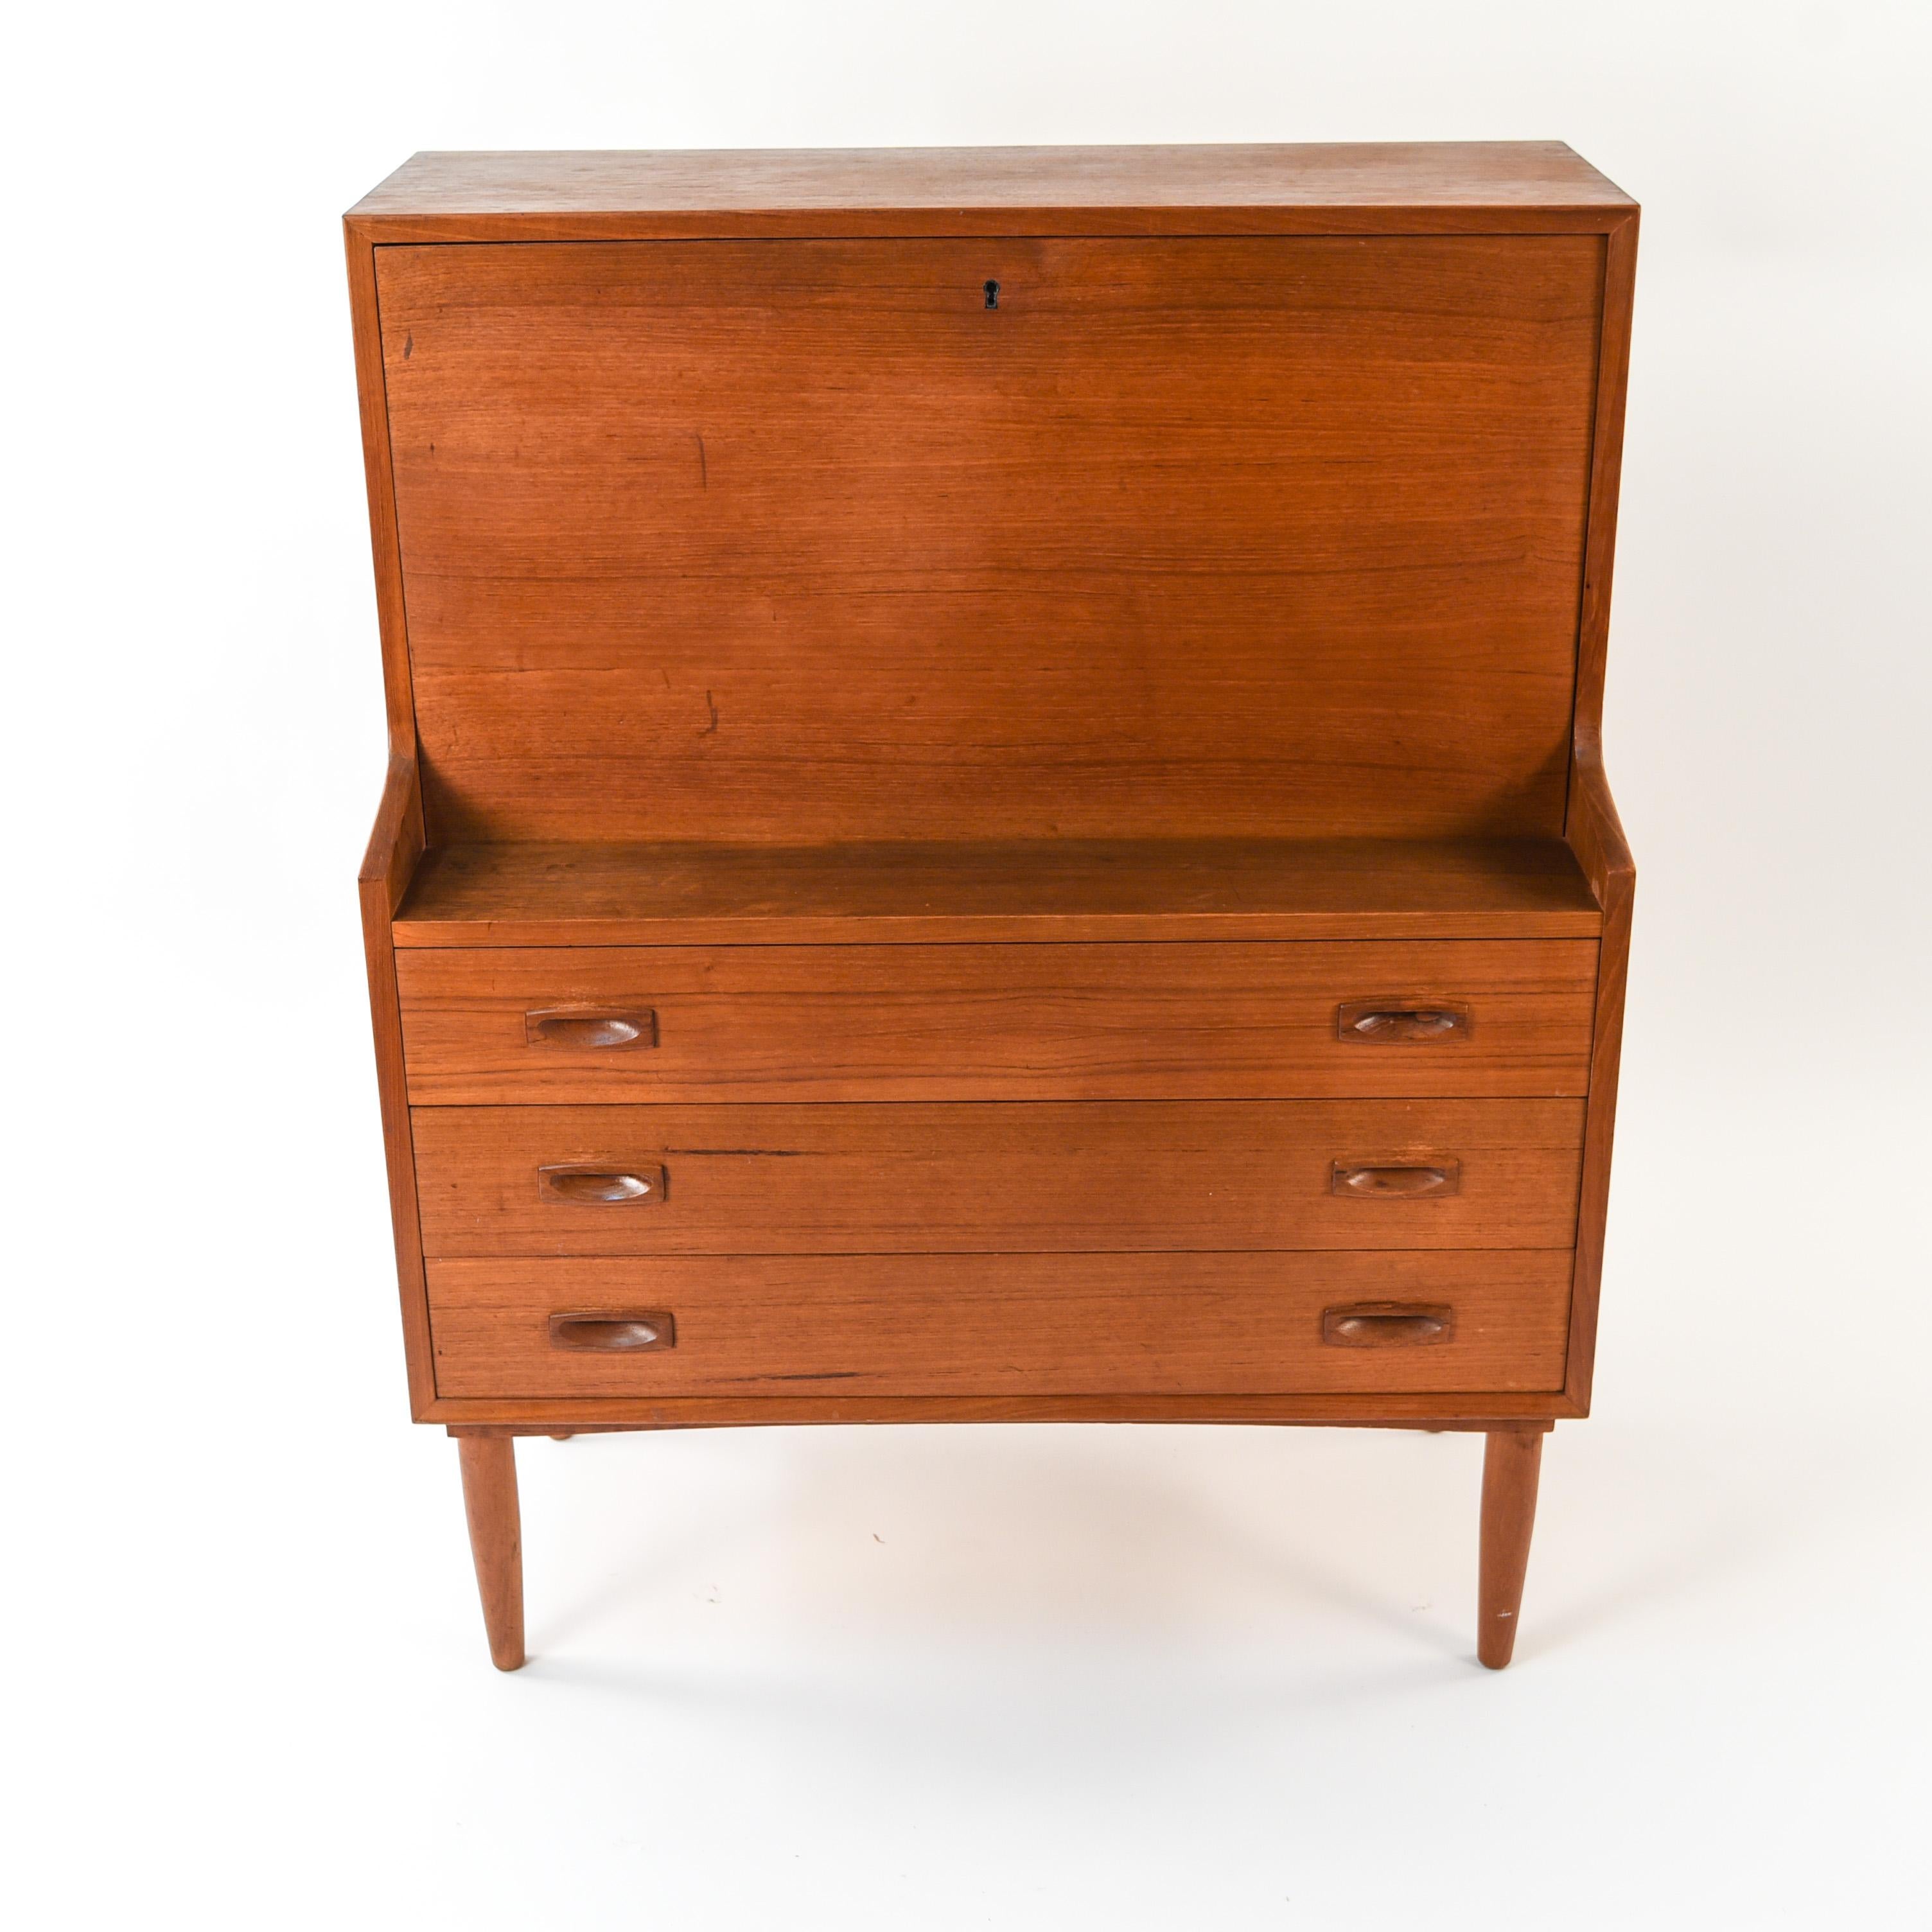 This Danish midcentury secretary is made of teak wood and features sleek, clean lines. With recessed handles and rounded legs. Includes key.